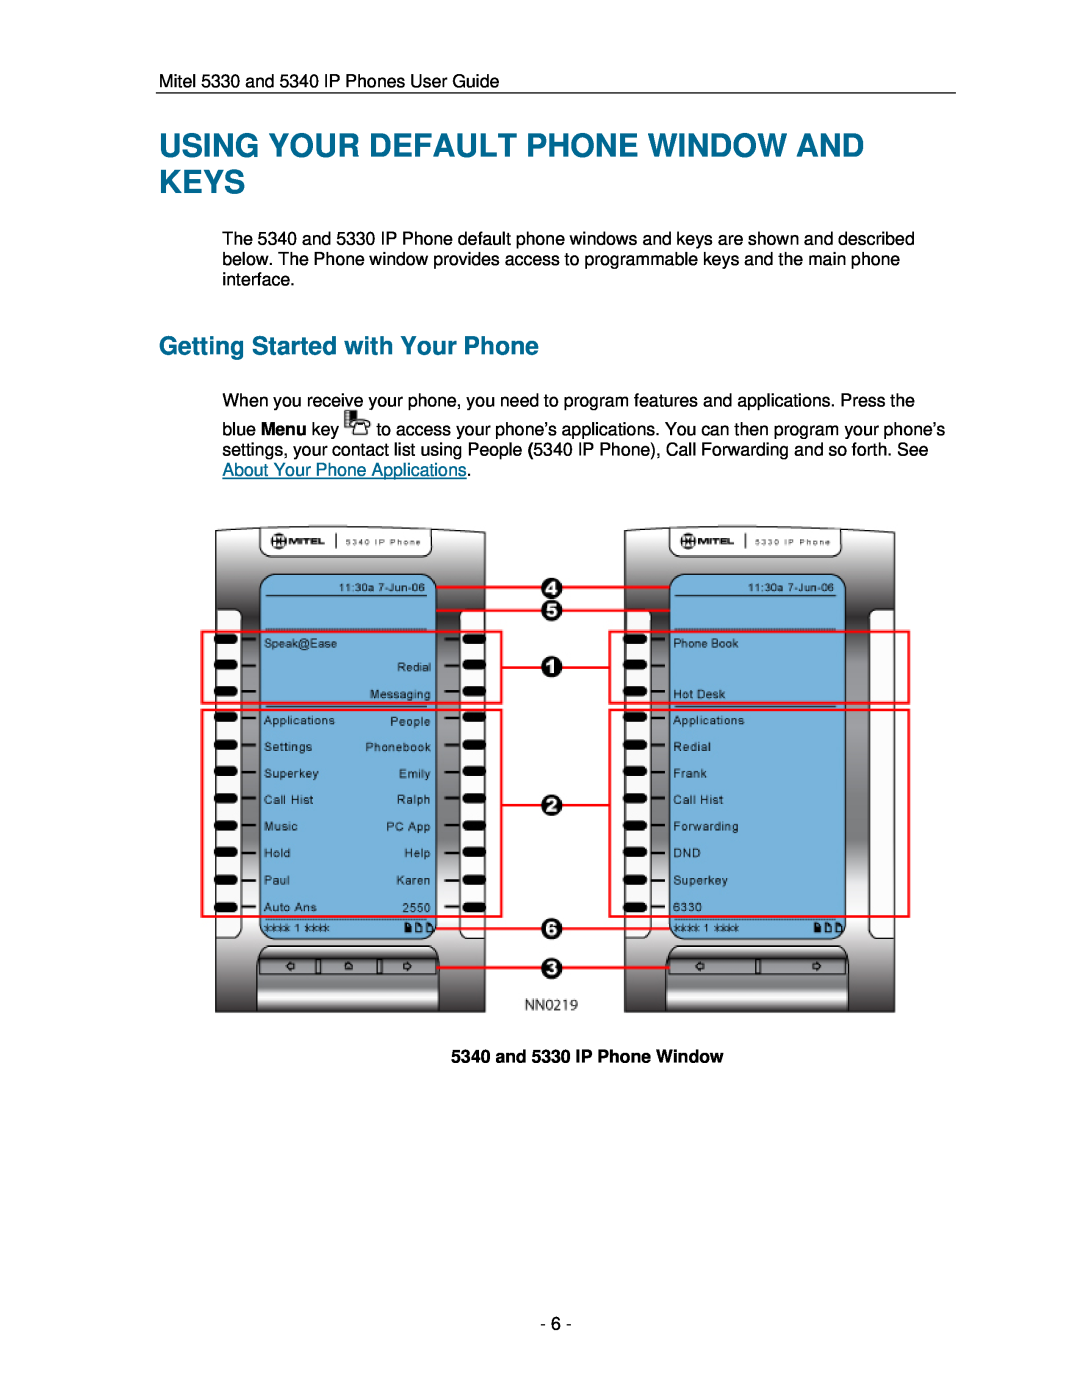 Mitel manual Using Your Default Phone Window And Keys, Getting Started with Your Phone, and 5330 IP Phone Window 